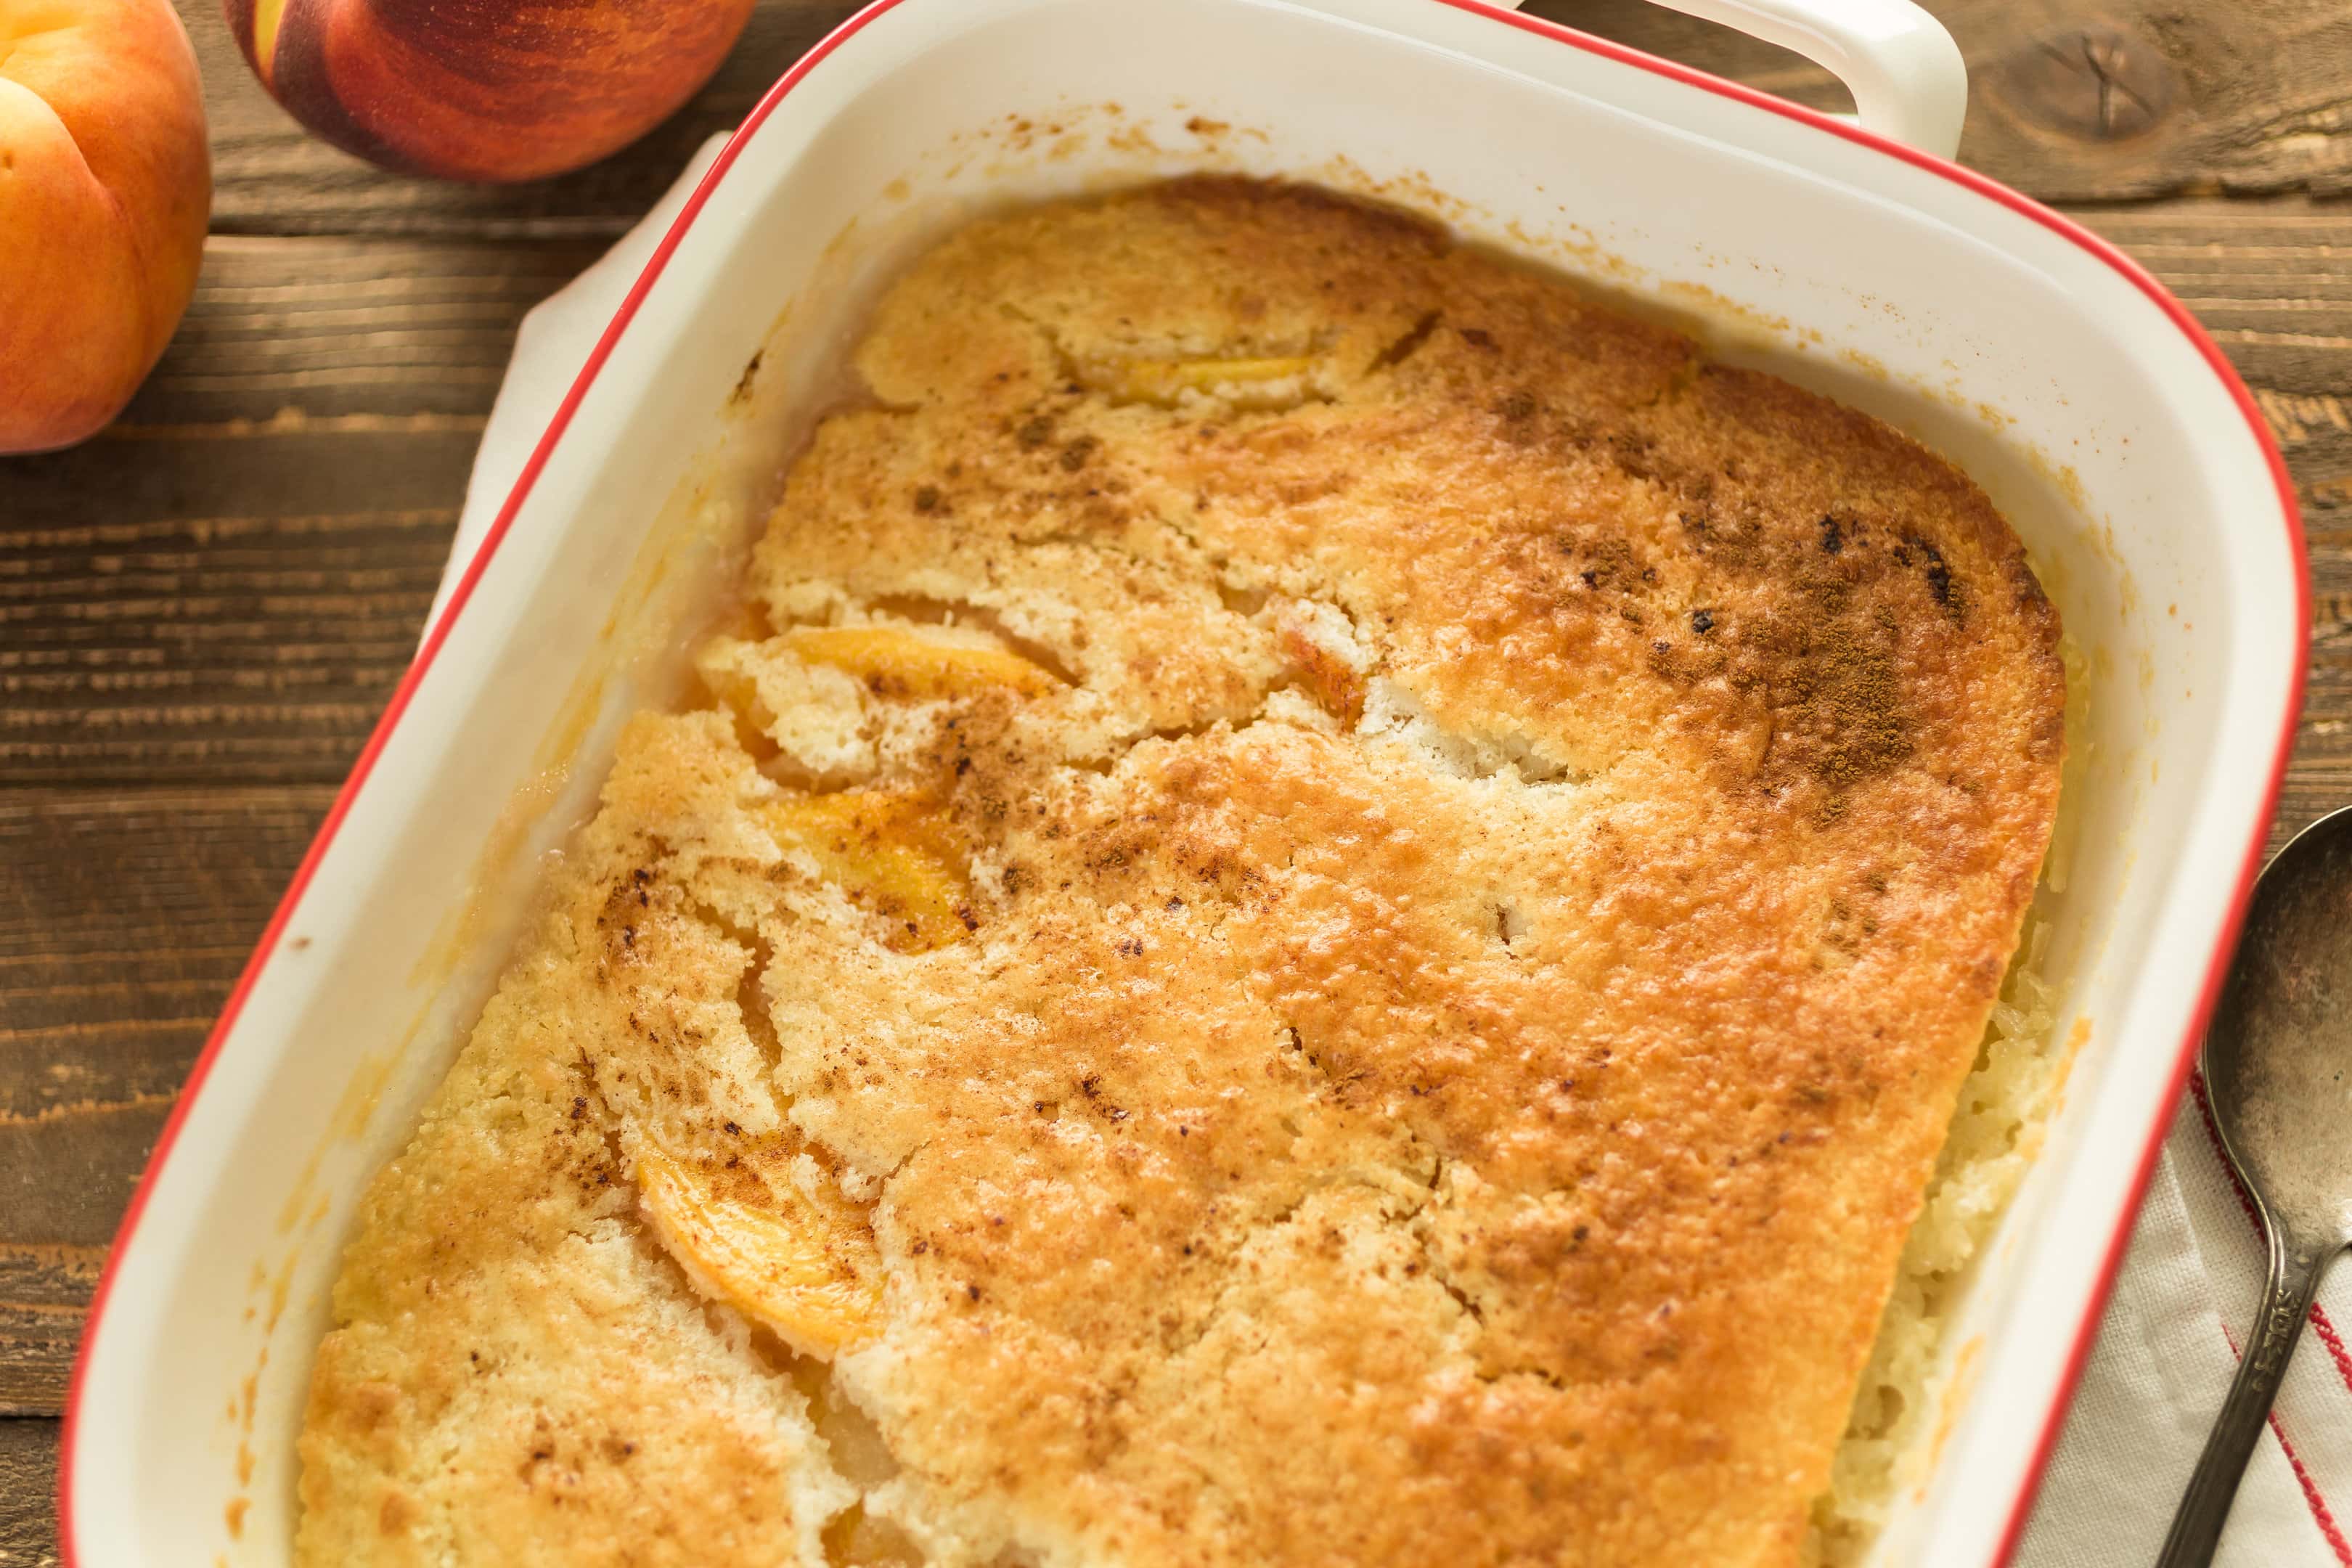 Freshly baked peach cobbler recipe with canned peaches